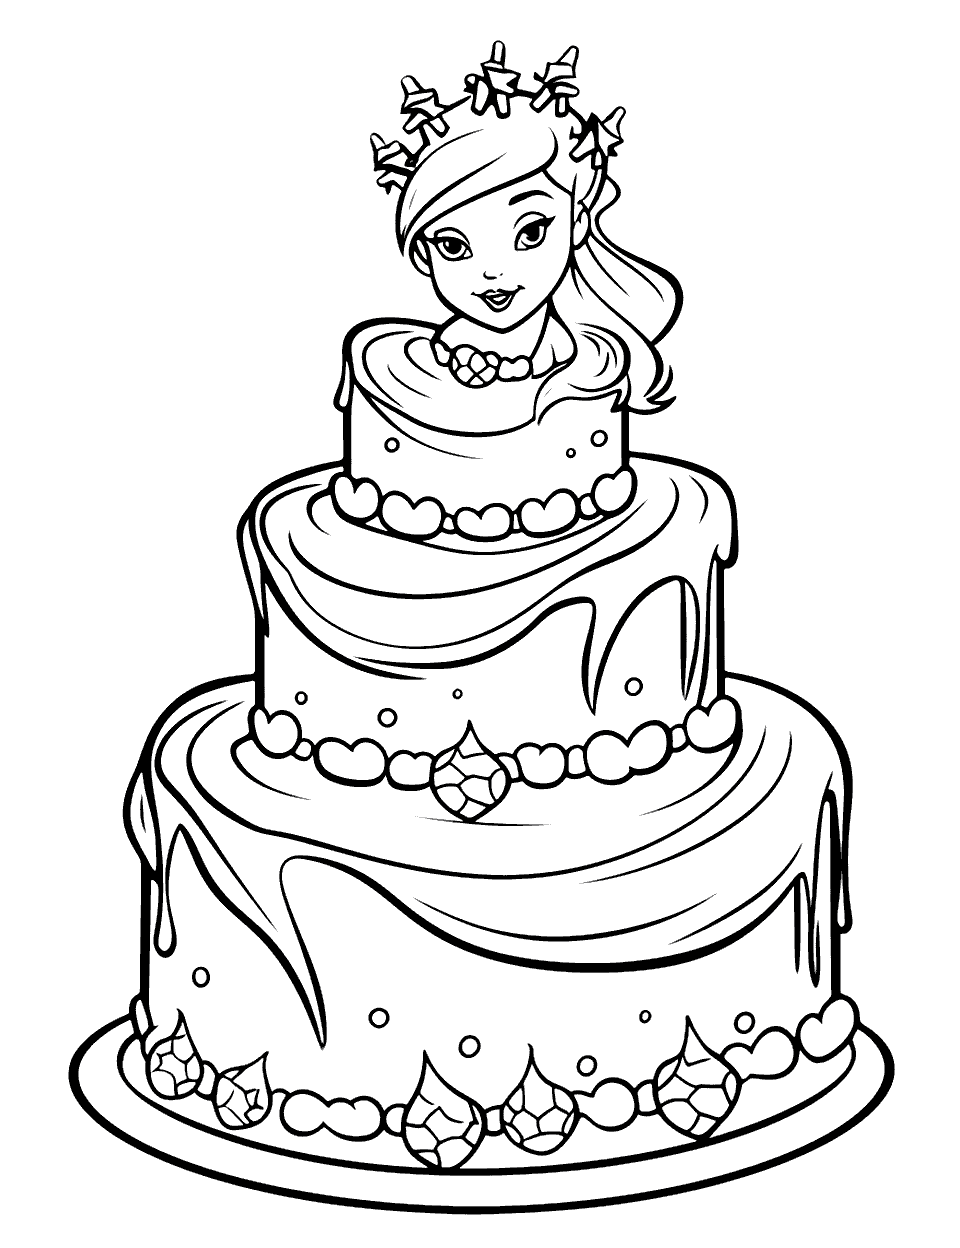 Elsa's Ice Cake Coloring Page - A frozen-themed cake with elsa’s face as decoration.